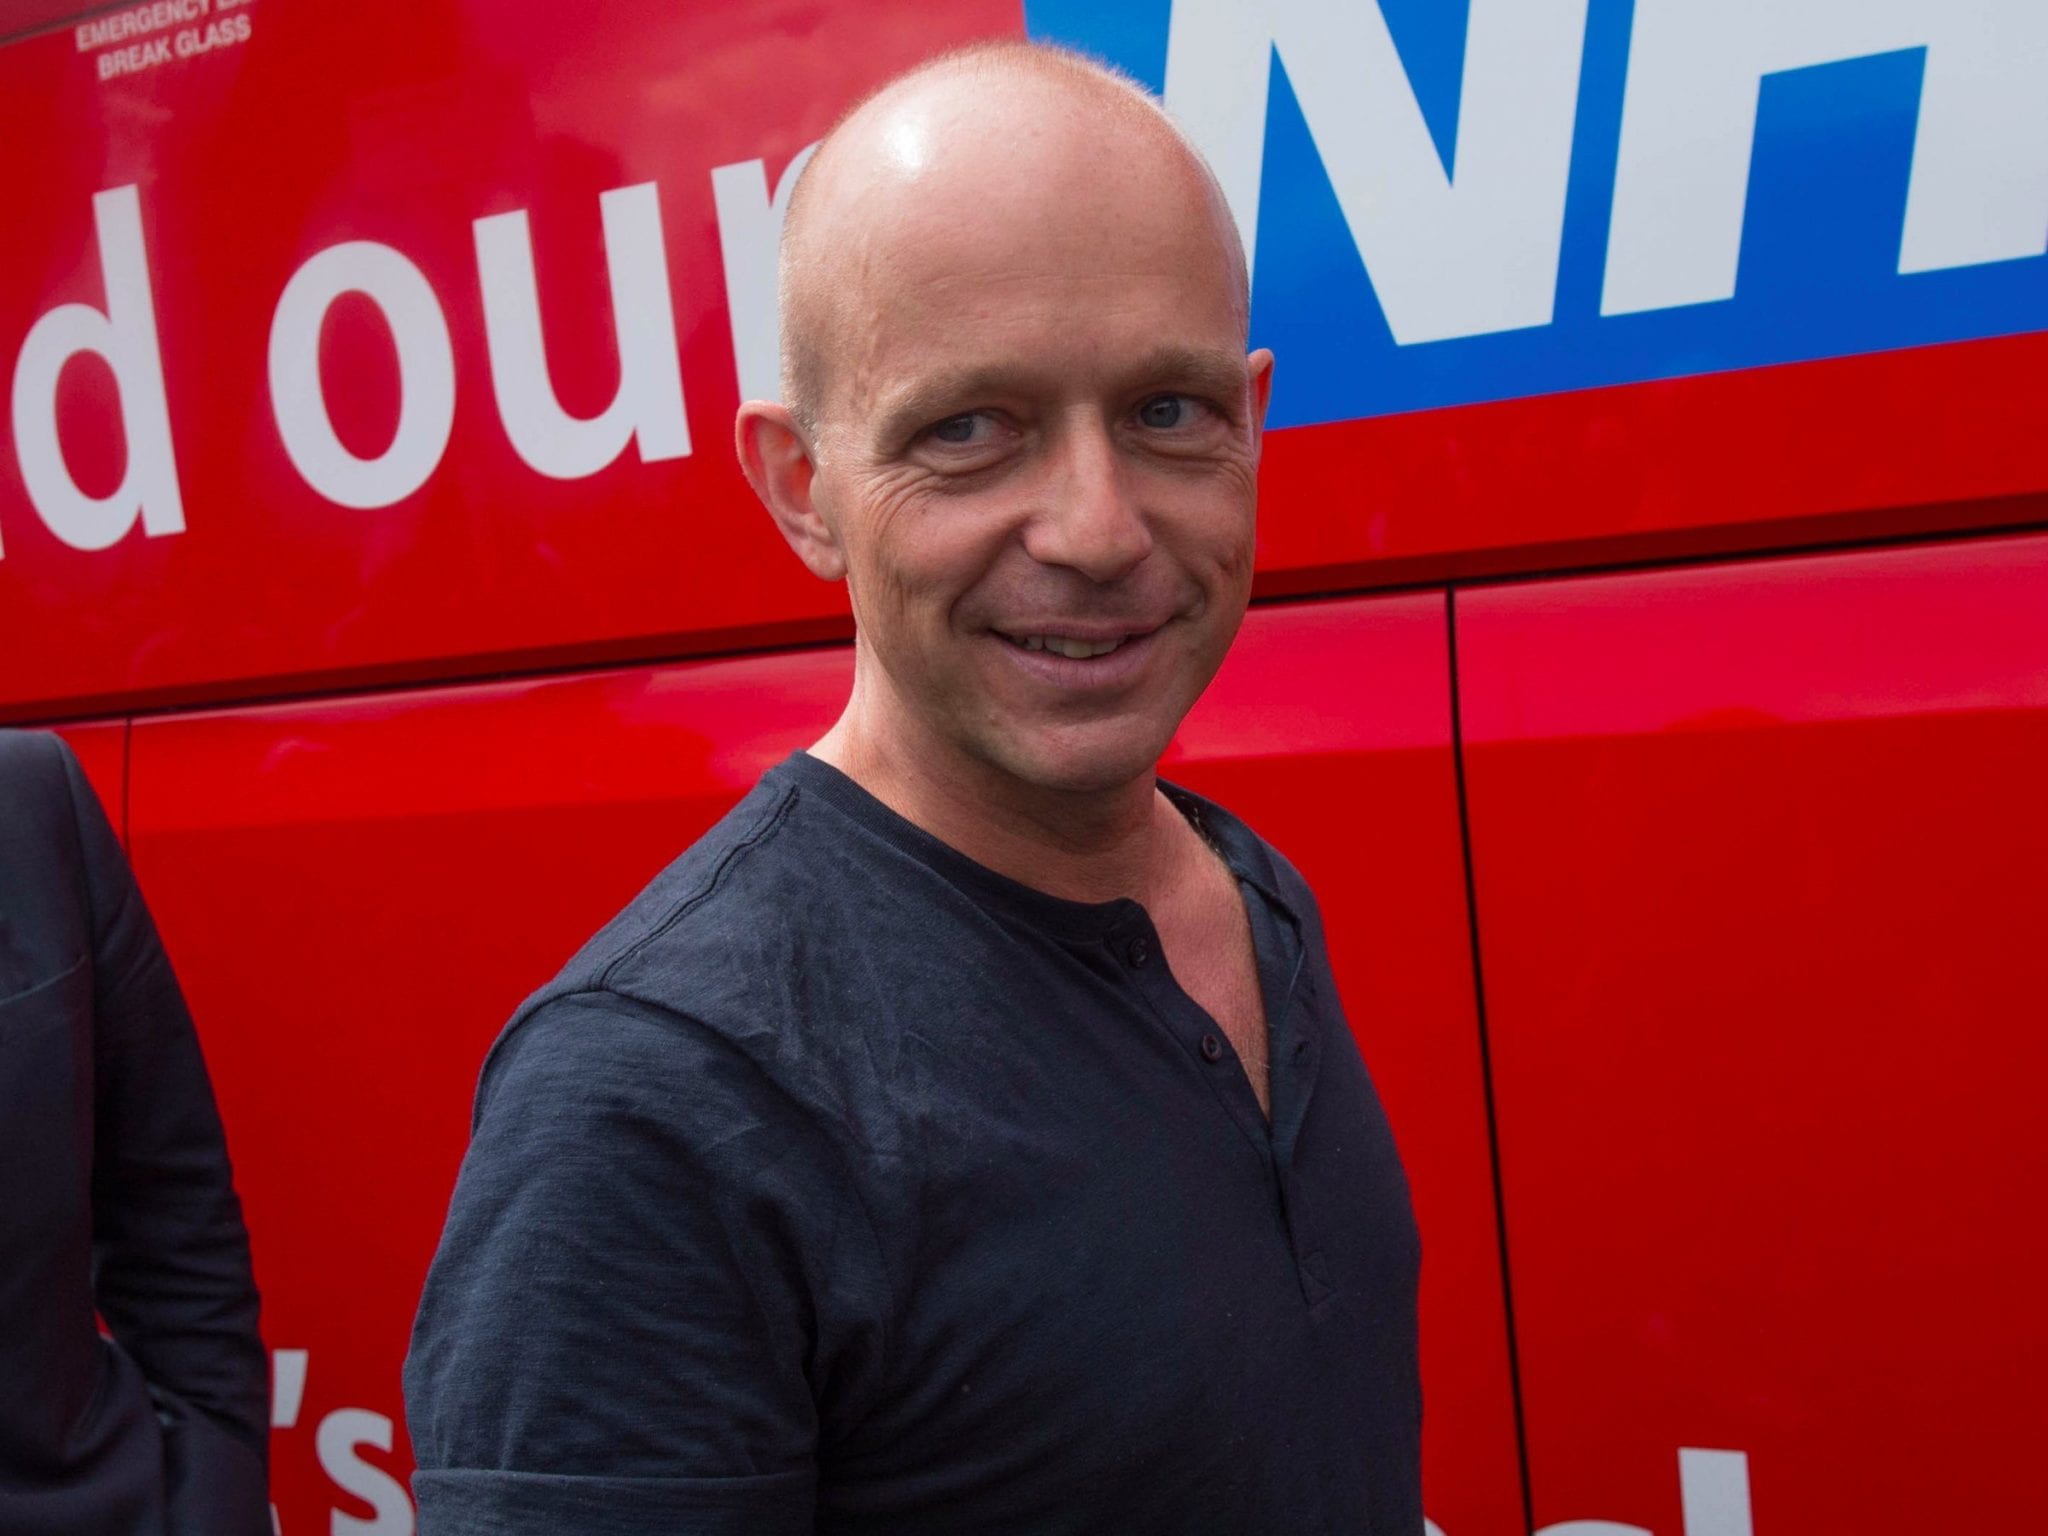 Cameron’s Former Advisor Steve Hilton : British politics is corrupt and needs ‘cleaning up’